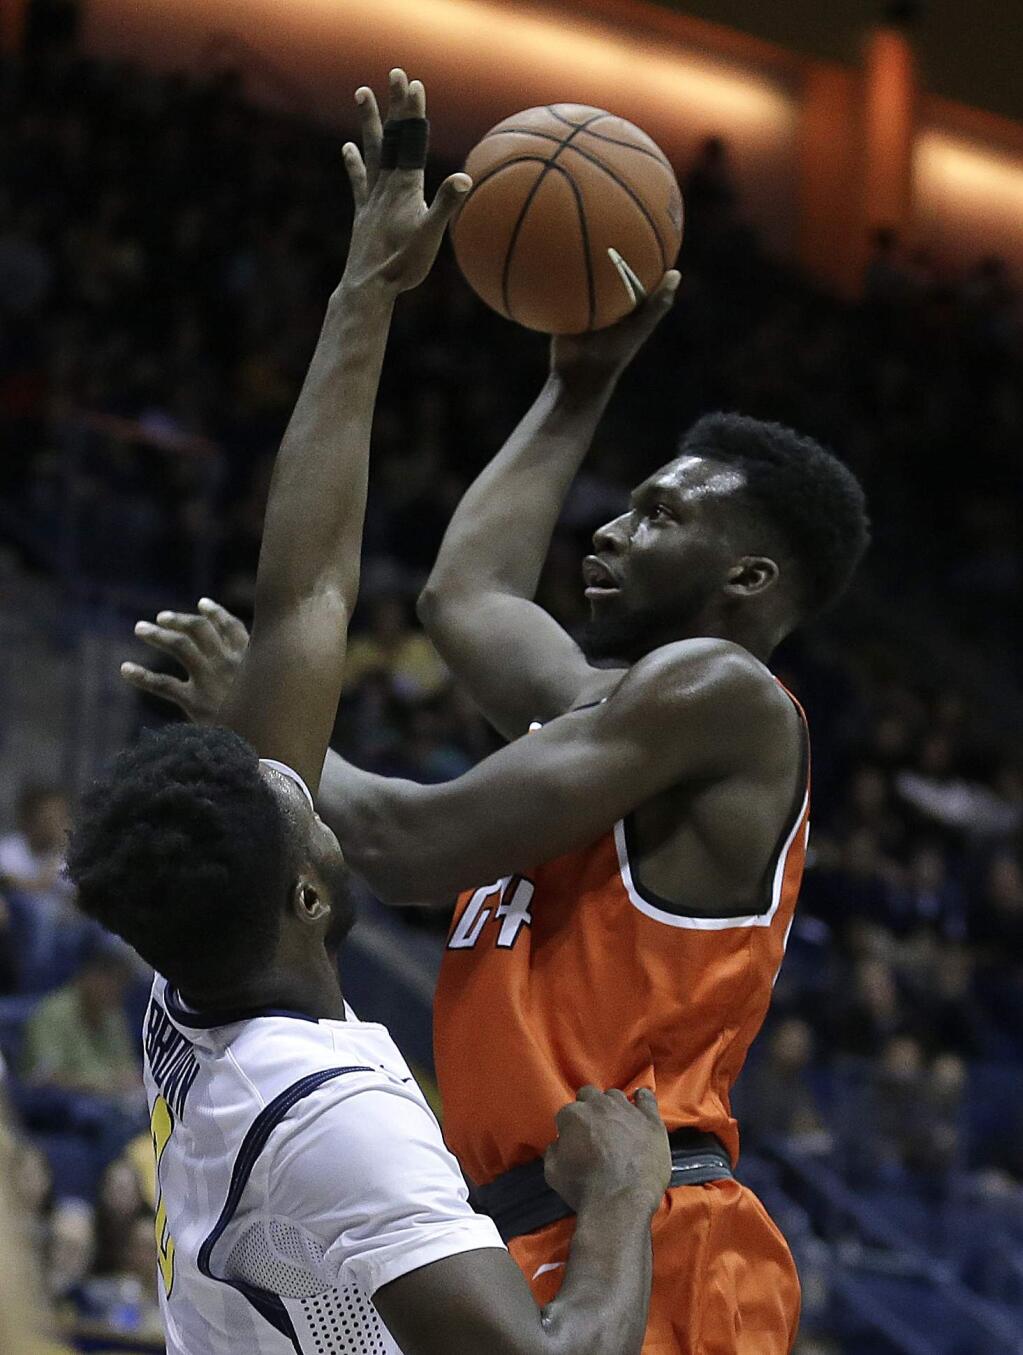 Sam Houston State's Torry Butler, right, shoots over California's Jaylen Brown in the first half of an NCAA college basketball game Monday, Nov. 23, 2015, in Berkeley, Calif. (AP Photo/Ben Margot)